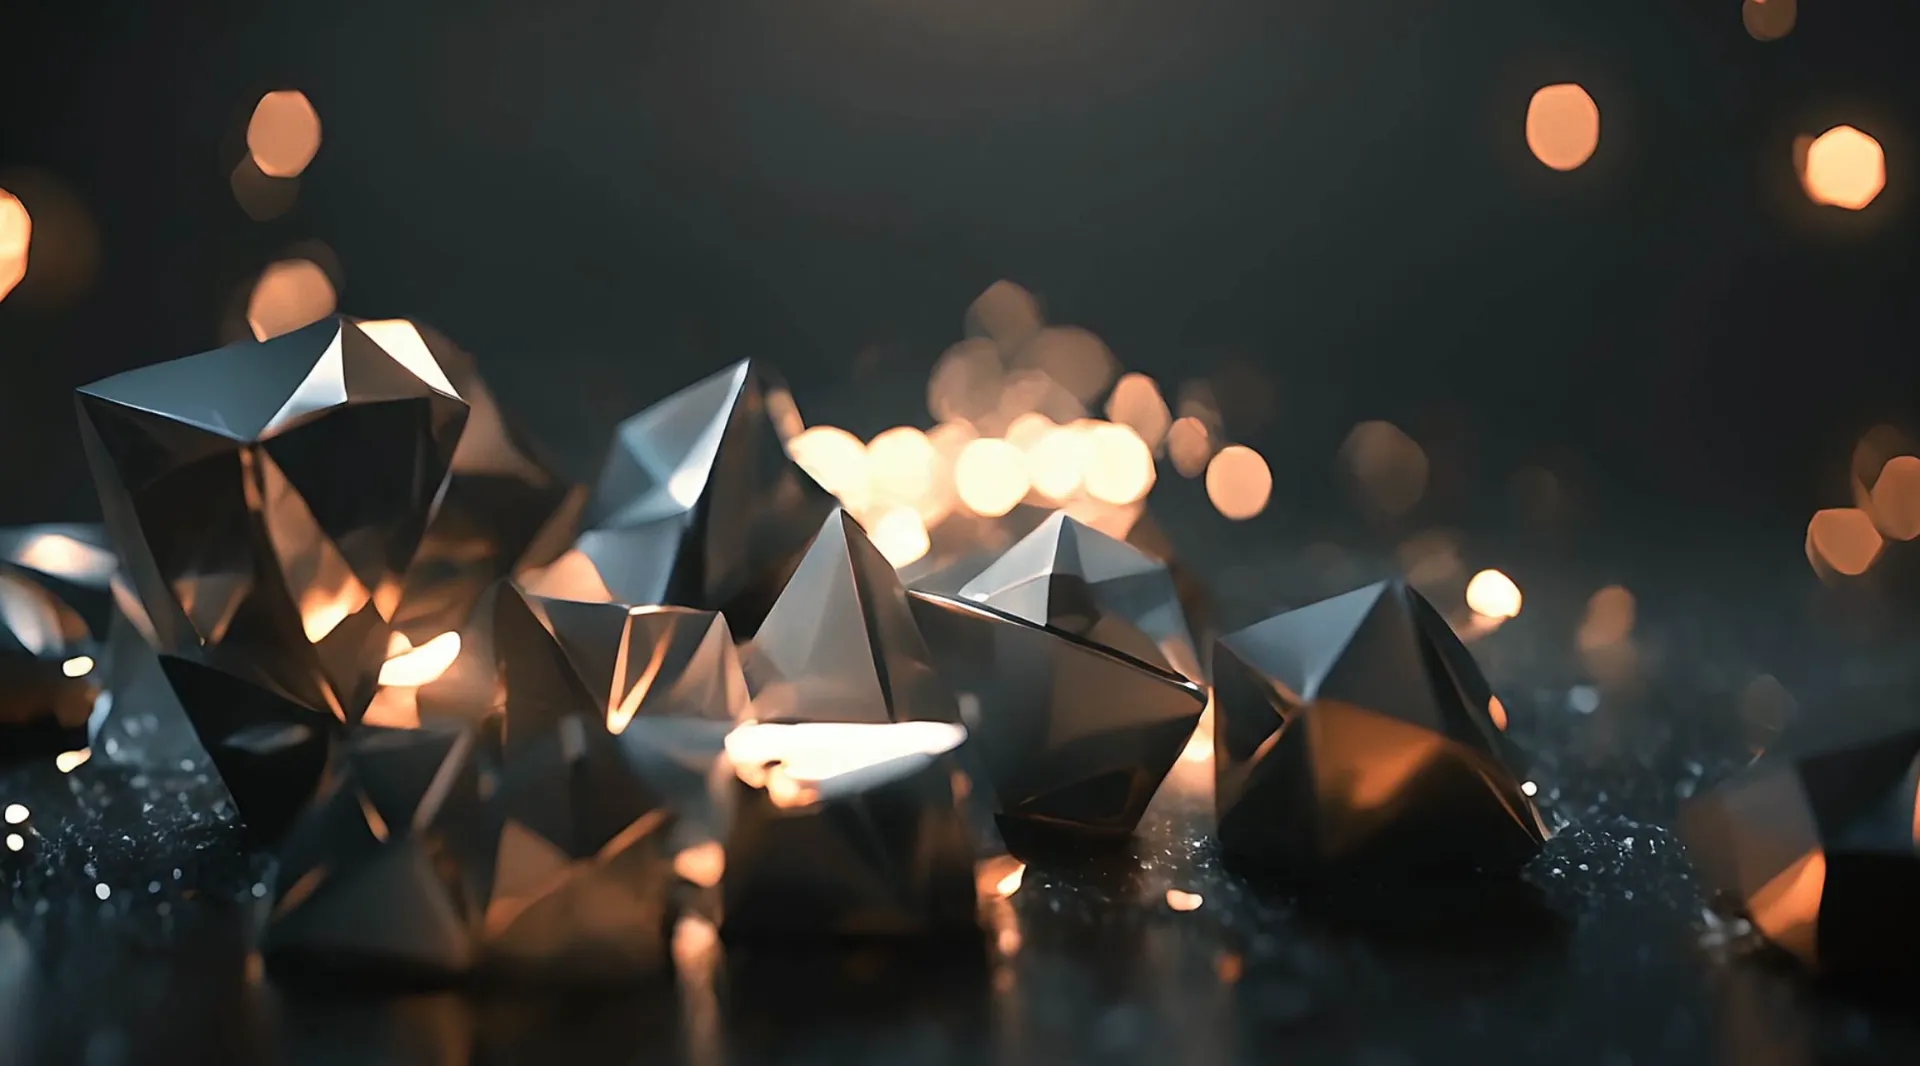 Abstract 3D Geometric Animation